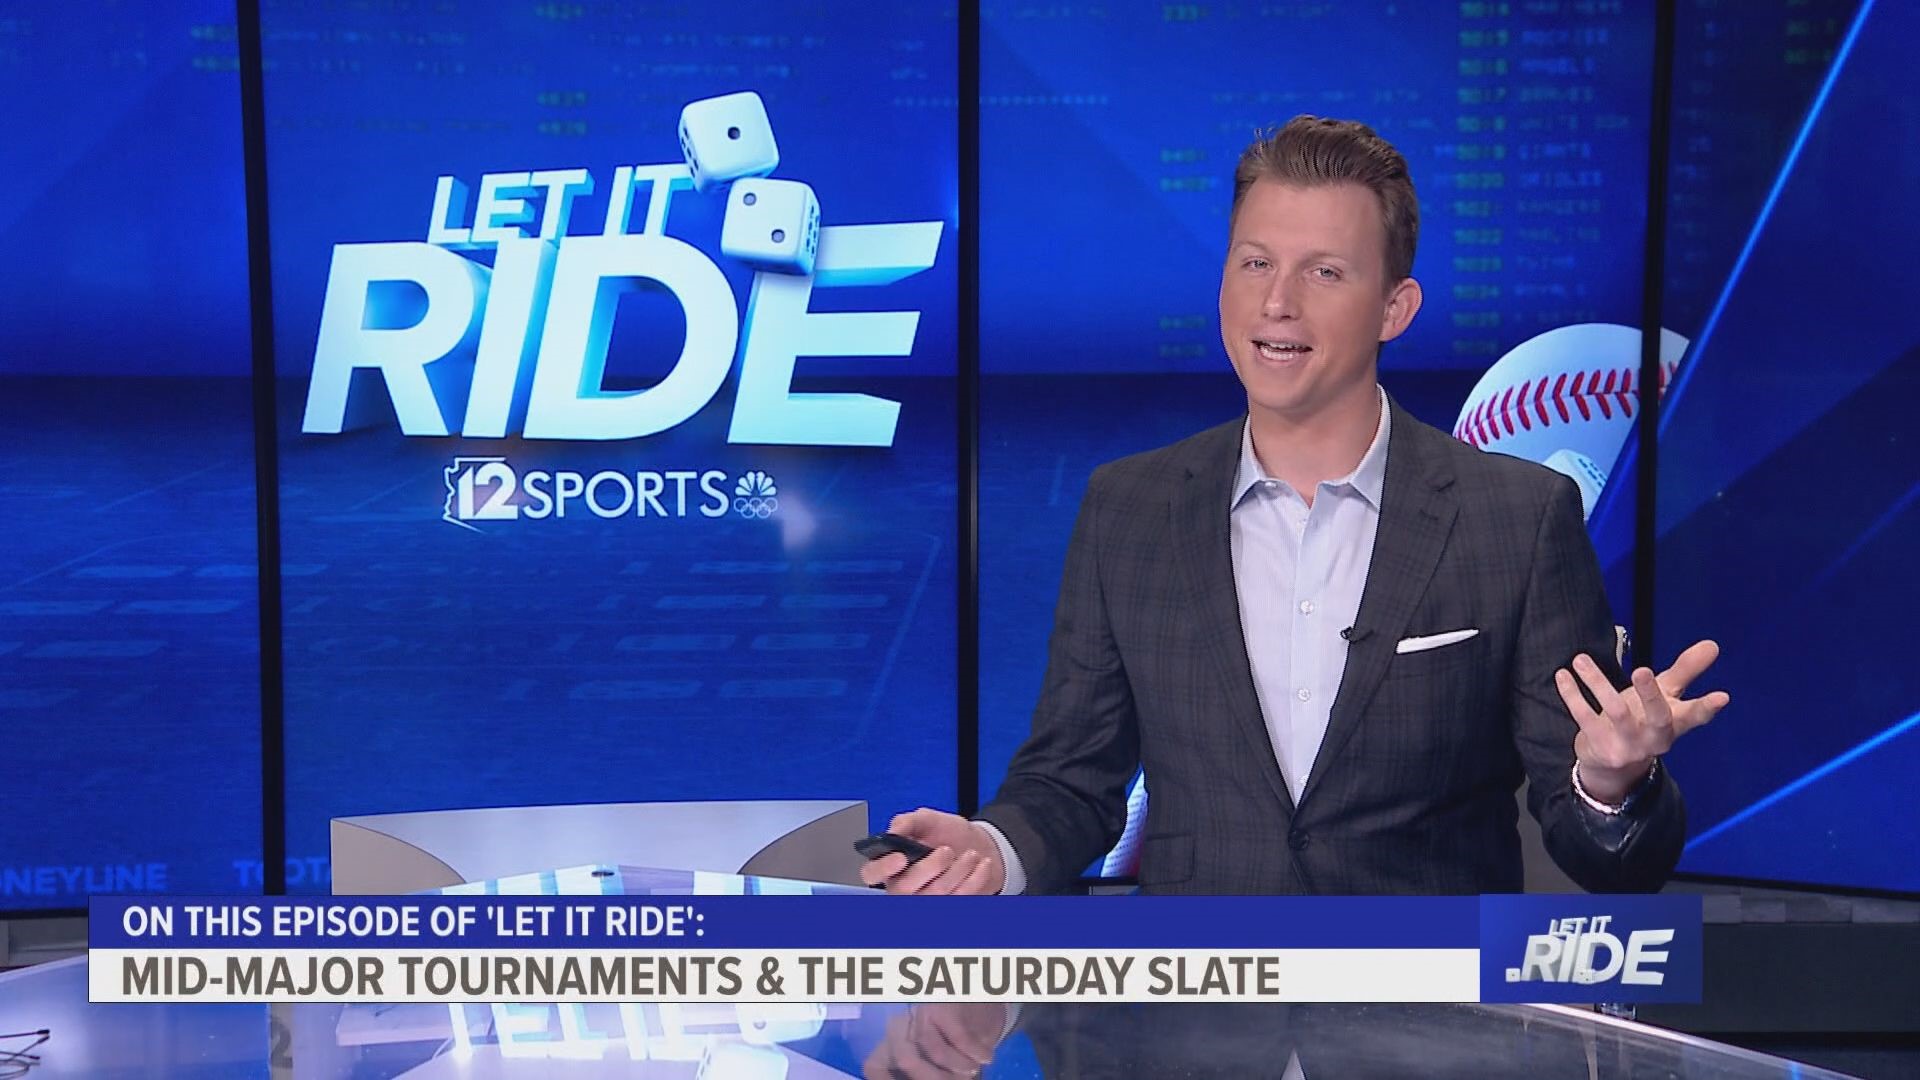 On the March 8 edition of "Let It Ride," host Luke Lyddon talks about Mid-Major tournaments and the Saturday slate.